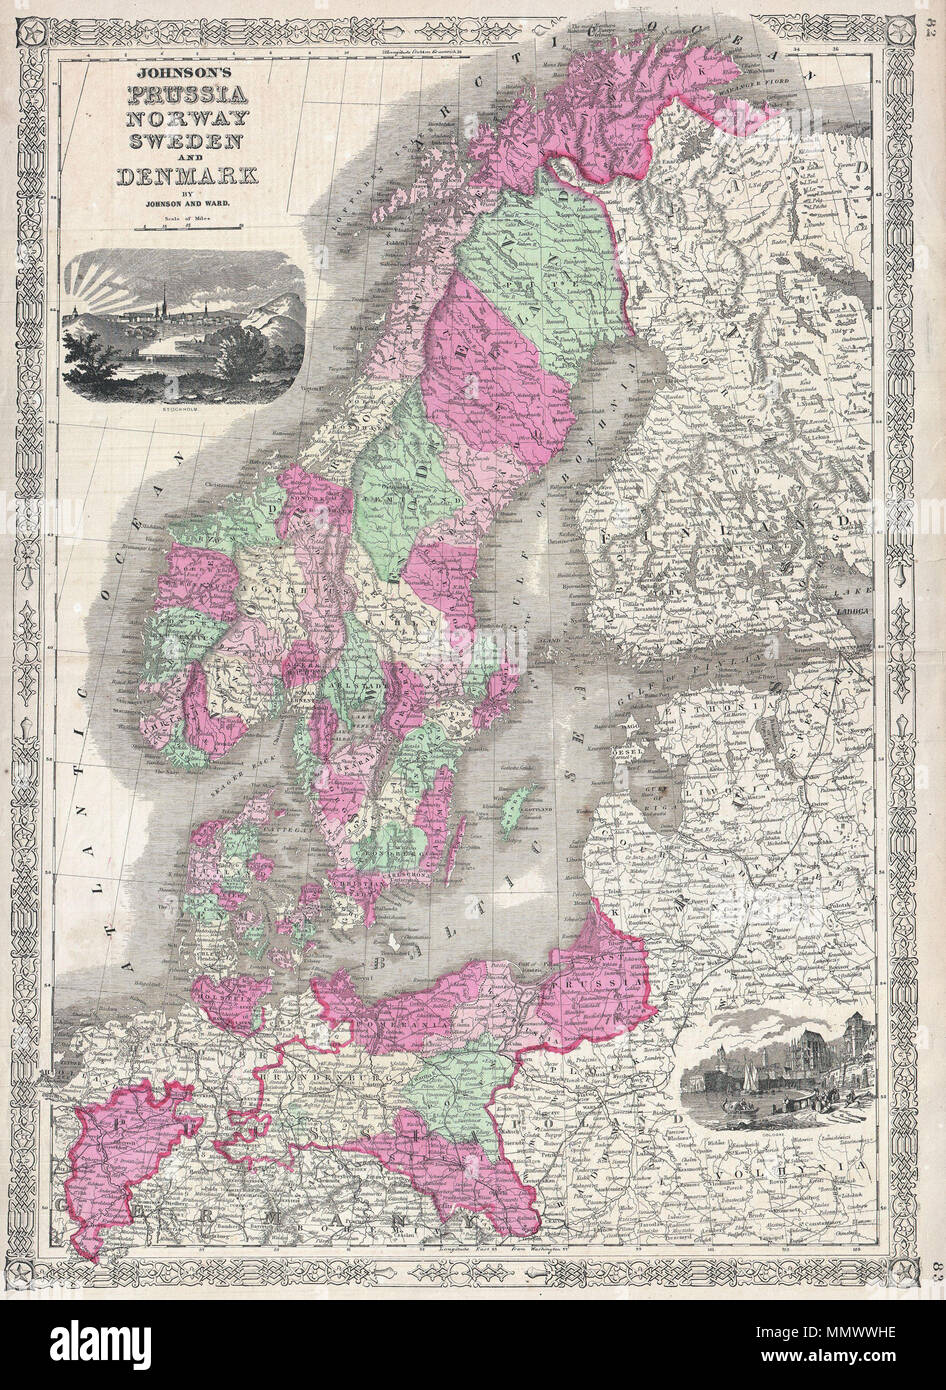 .  English: This is A. J. Johnson and Ward’s 1864 map of Scandinavia. Depicts all of Sweden, Norway, Finland, Denmark and Prussia, as well as parts of Estonia, Latvia and Lithuania. There are two decorative city views, Stockholm in the upper left quadrant and Cologne in the lower right. Features the fretwork border common to Johnson’s atlas maps from 1864 to 1869. Steel plate engraving prepared by A. J. Johnson for publication as page nos.  Johnson's Prussia Norway Sweden and Denmark.. 1864 (undated). 1864 Johnson Map of Scandinavia ( Norway, Sweden, Denmark, Prussia) - Geographicus - Scandina Stock Photo